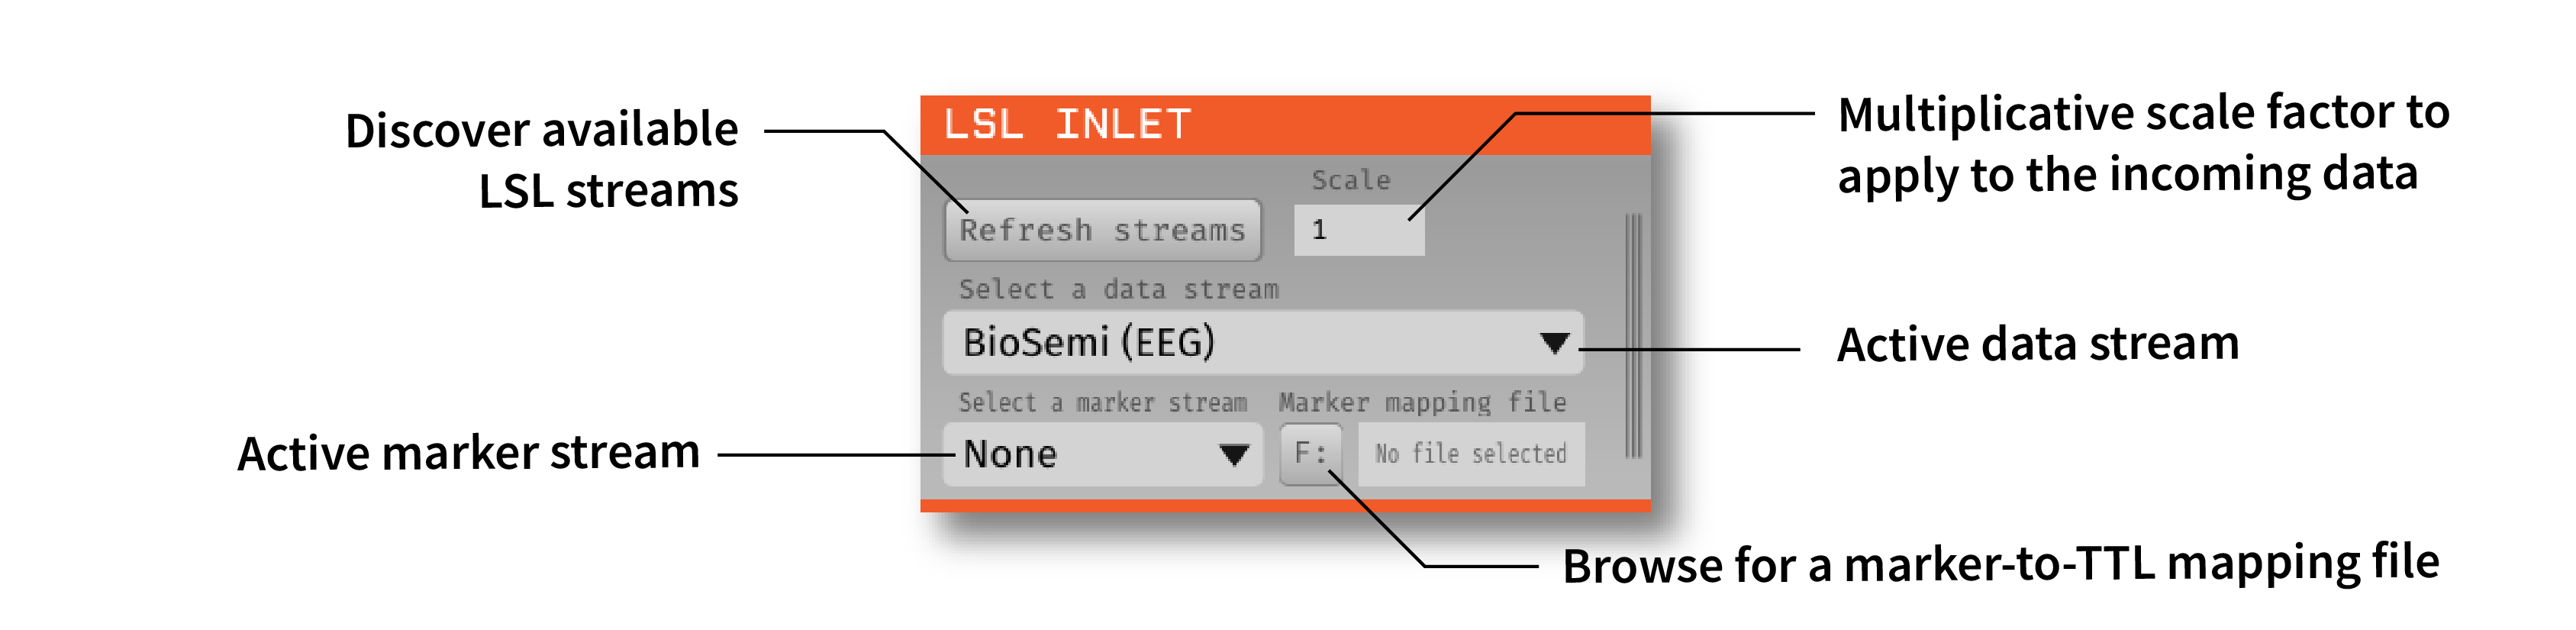 Annotated LSL Inlet editor